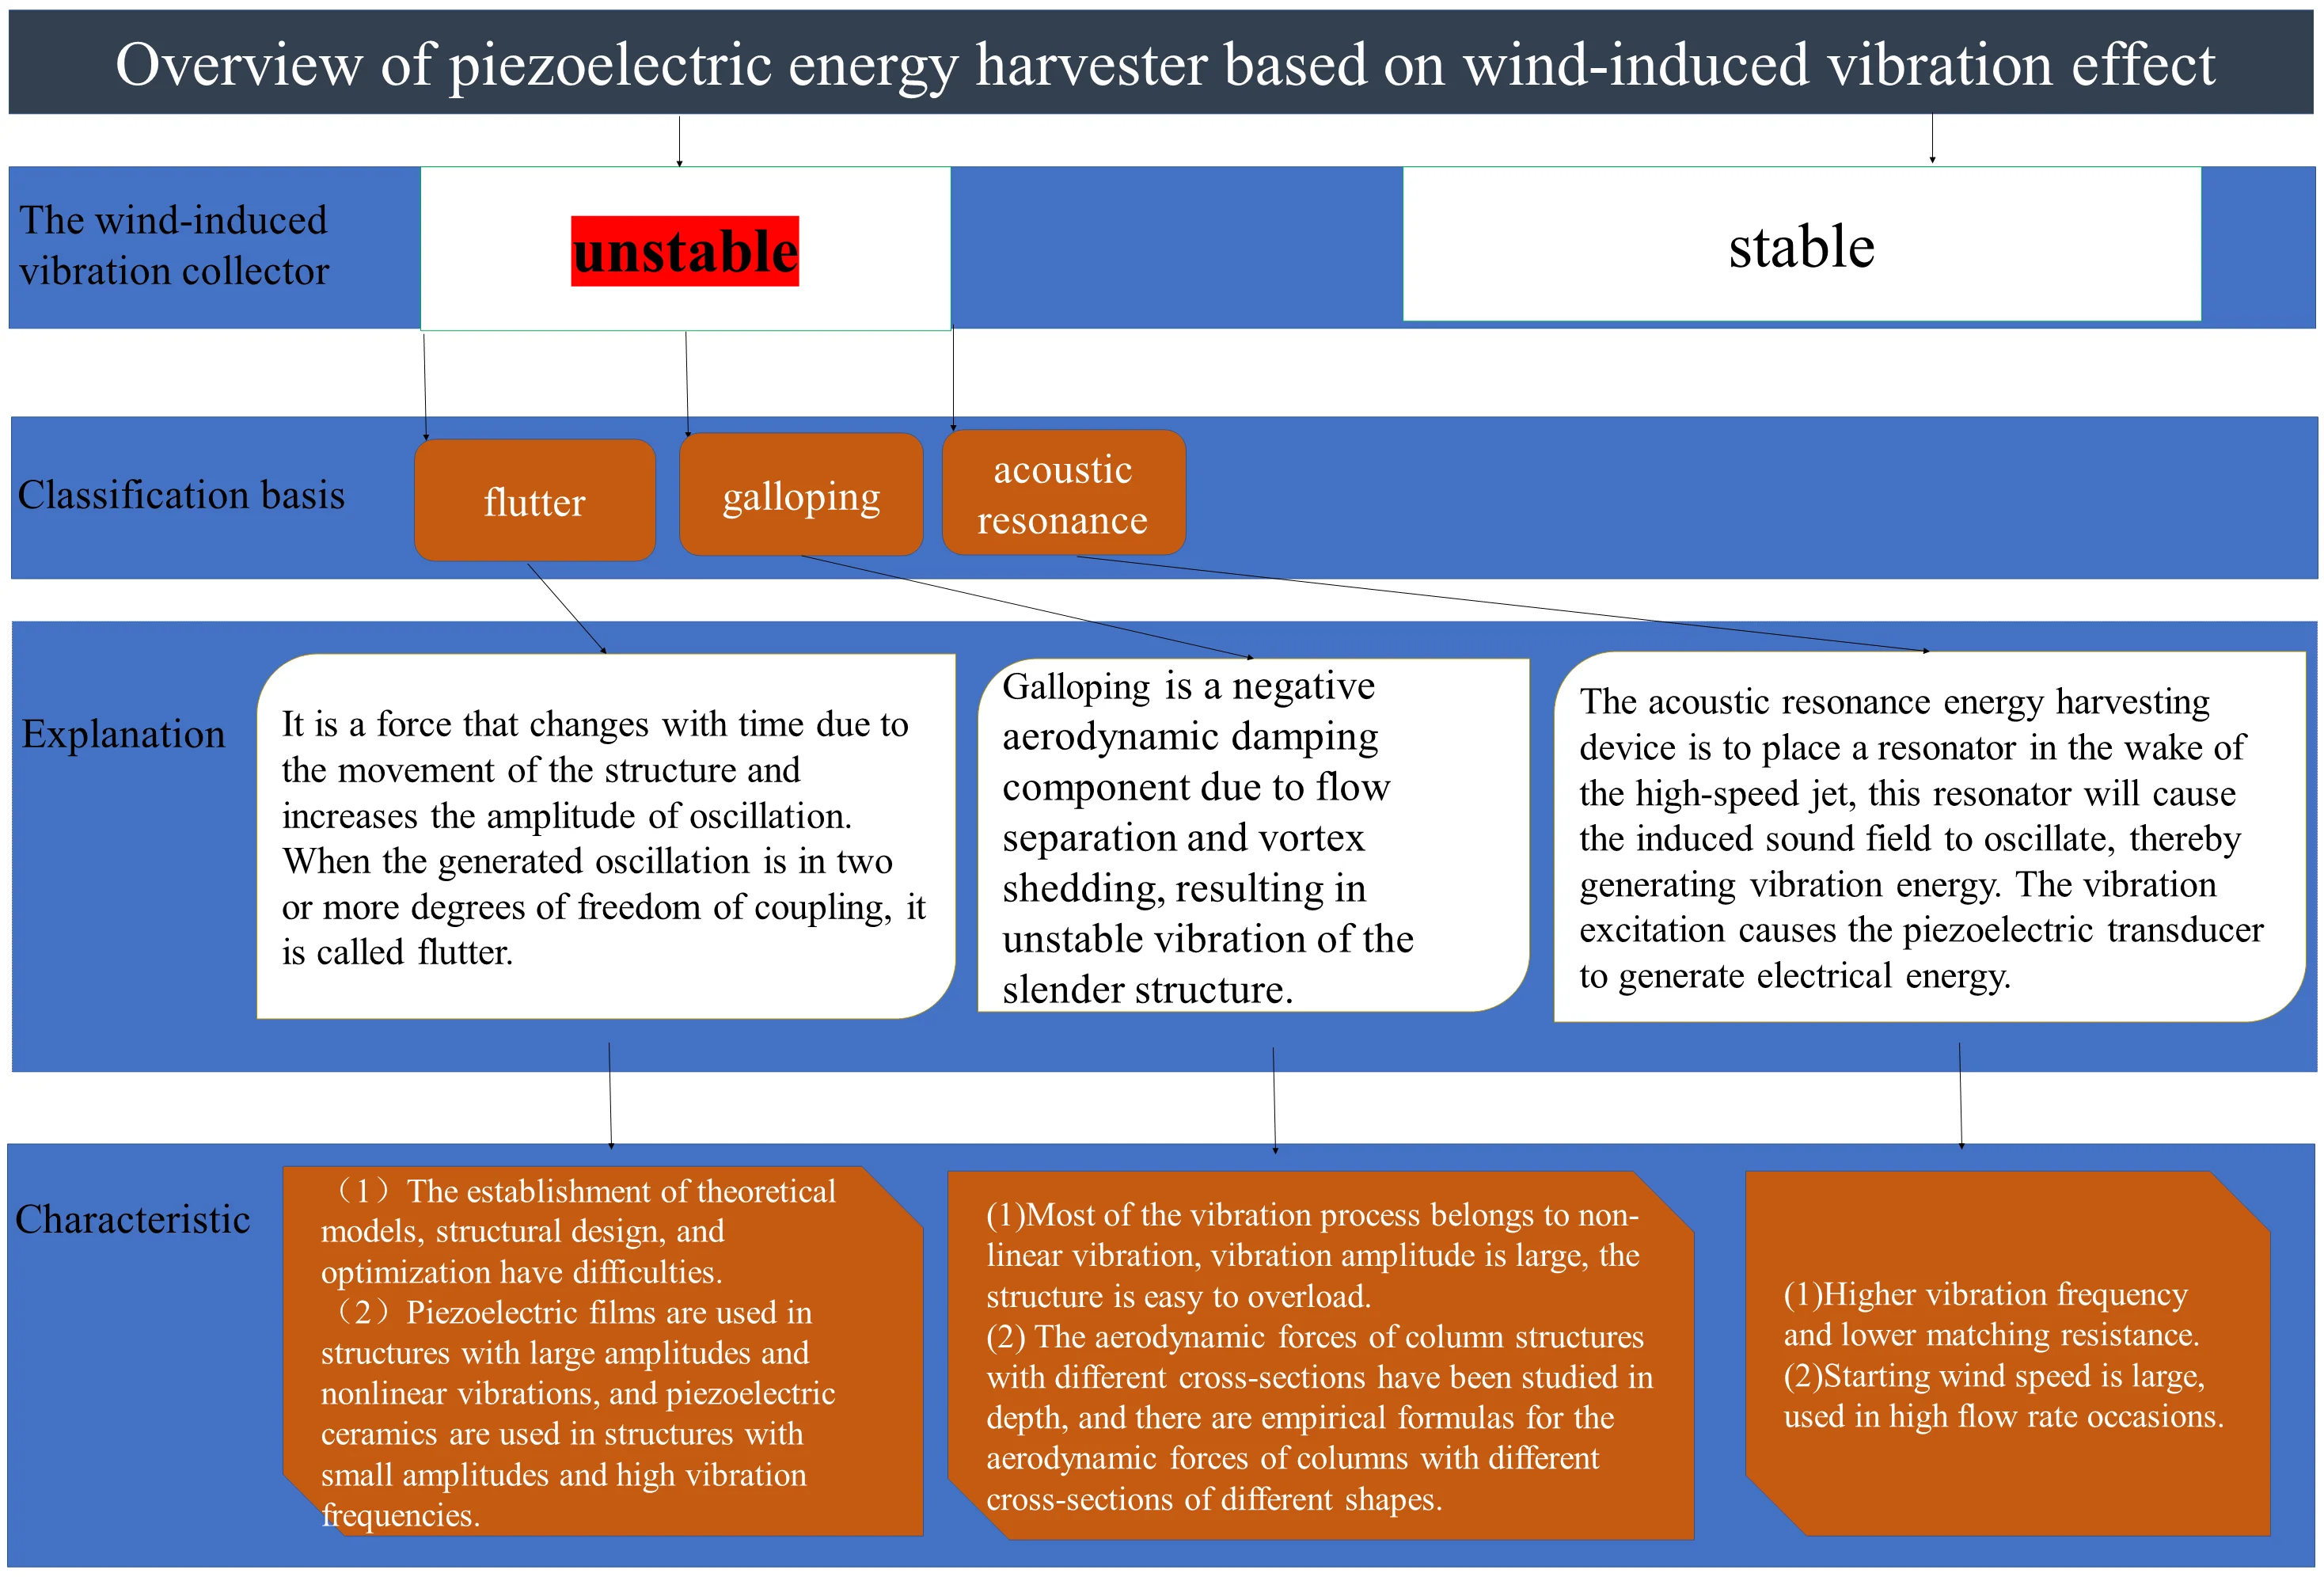 Overview of piezoelectric energy harvester based on wind-induced vibration effect